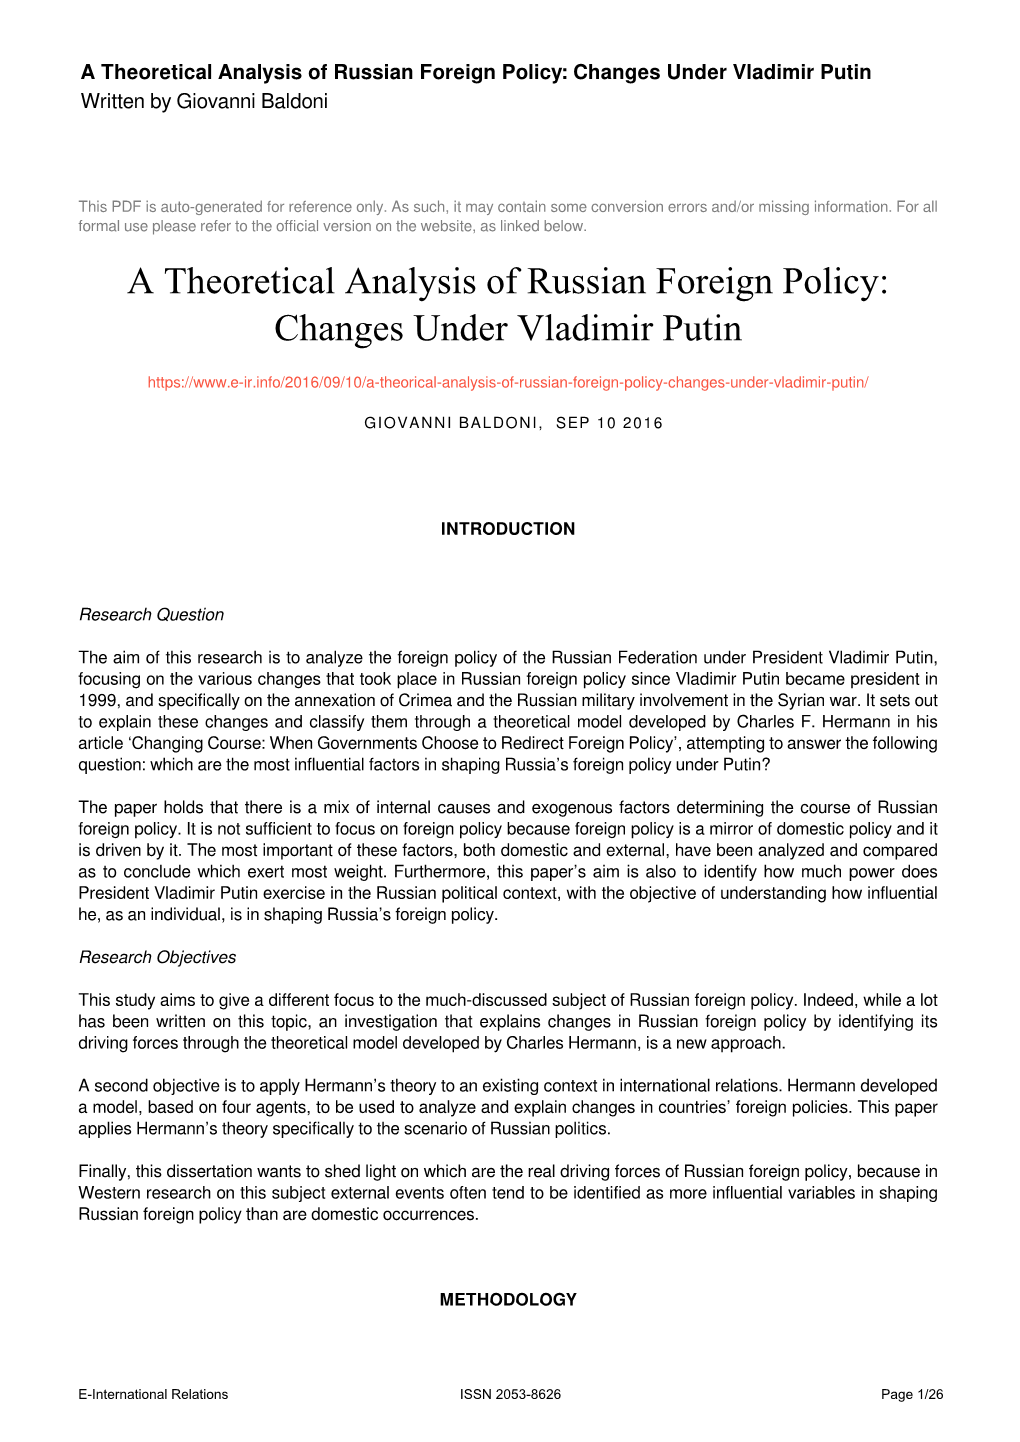 A Theoretical Analysis of Russian Foreign Policy: Changes Under Vladimir Putin Written by Giovanni Baldoni